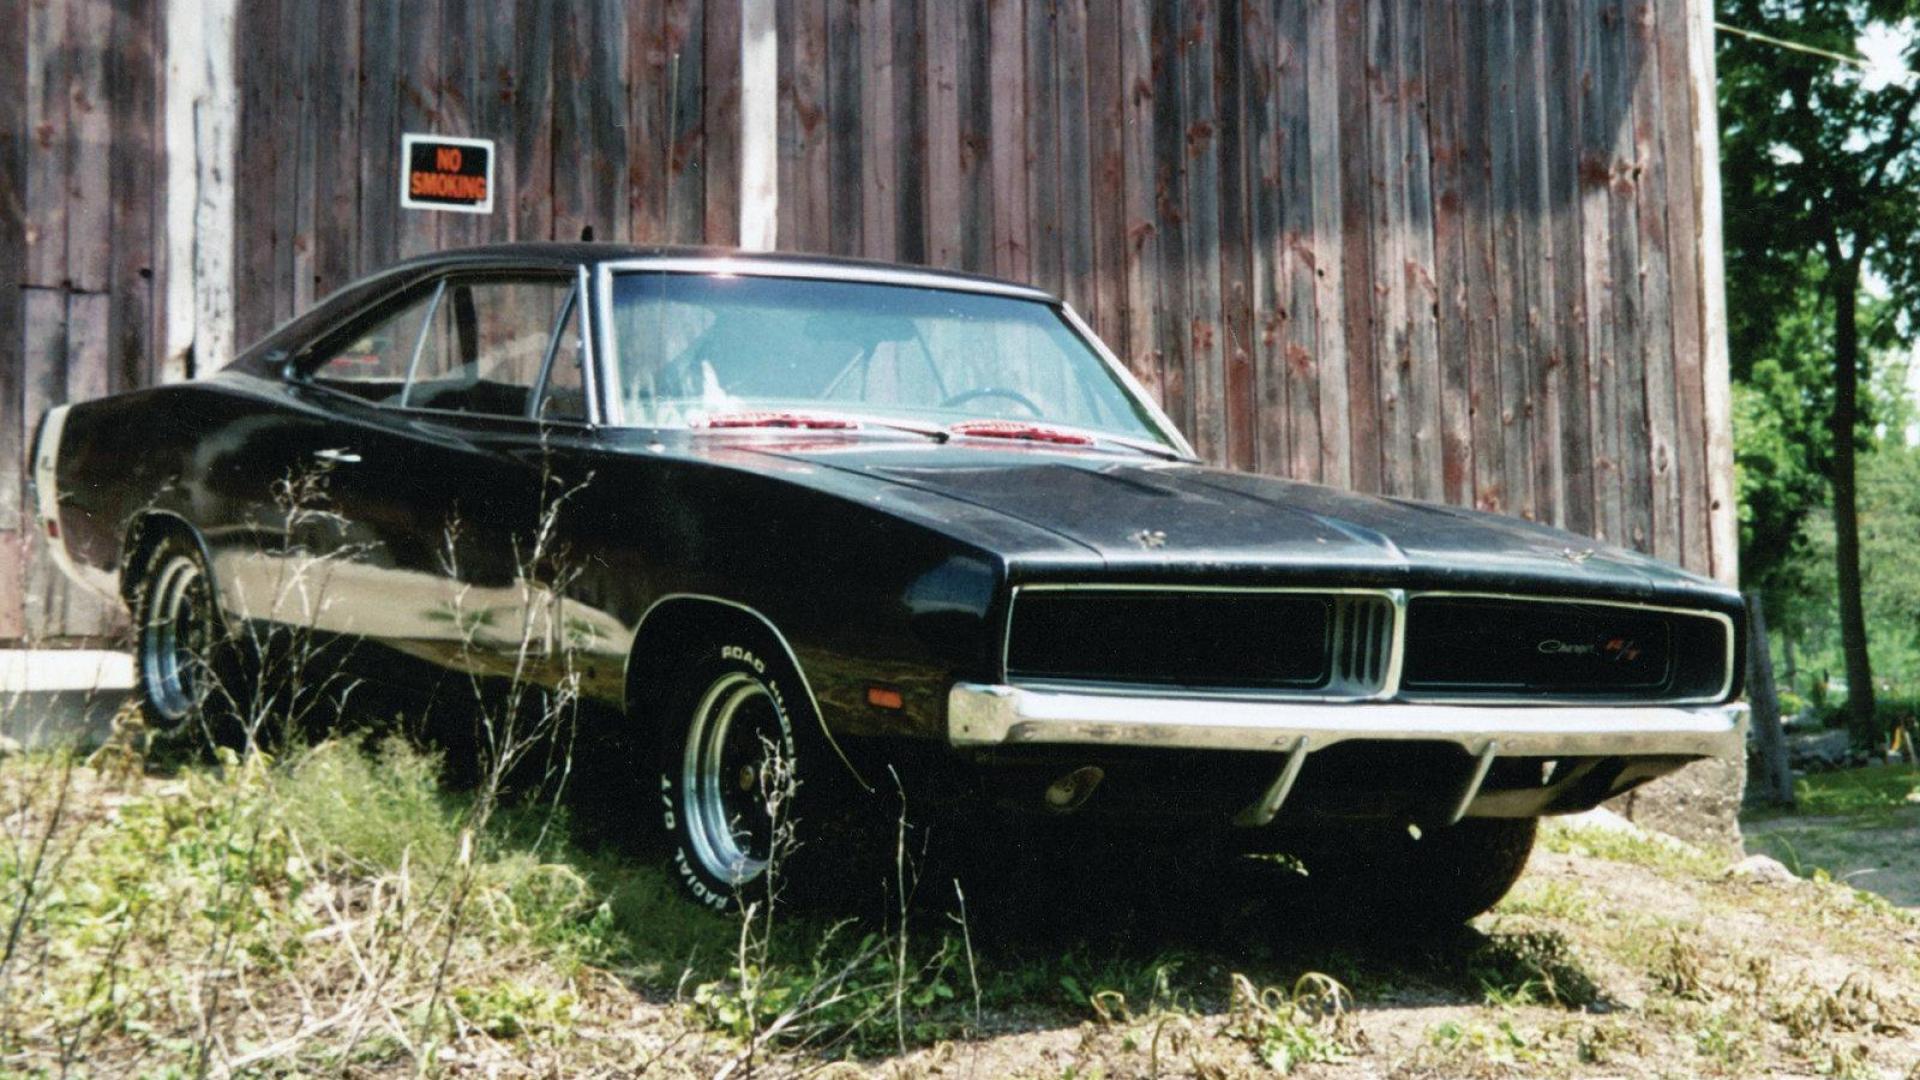 1969 dodge charger rt in a barn wallpaper - (#85027) - HQ Desktop ...